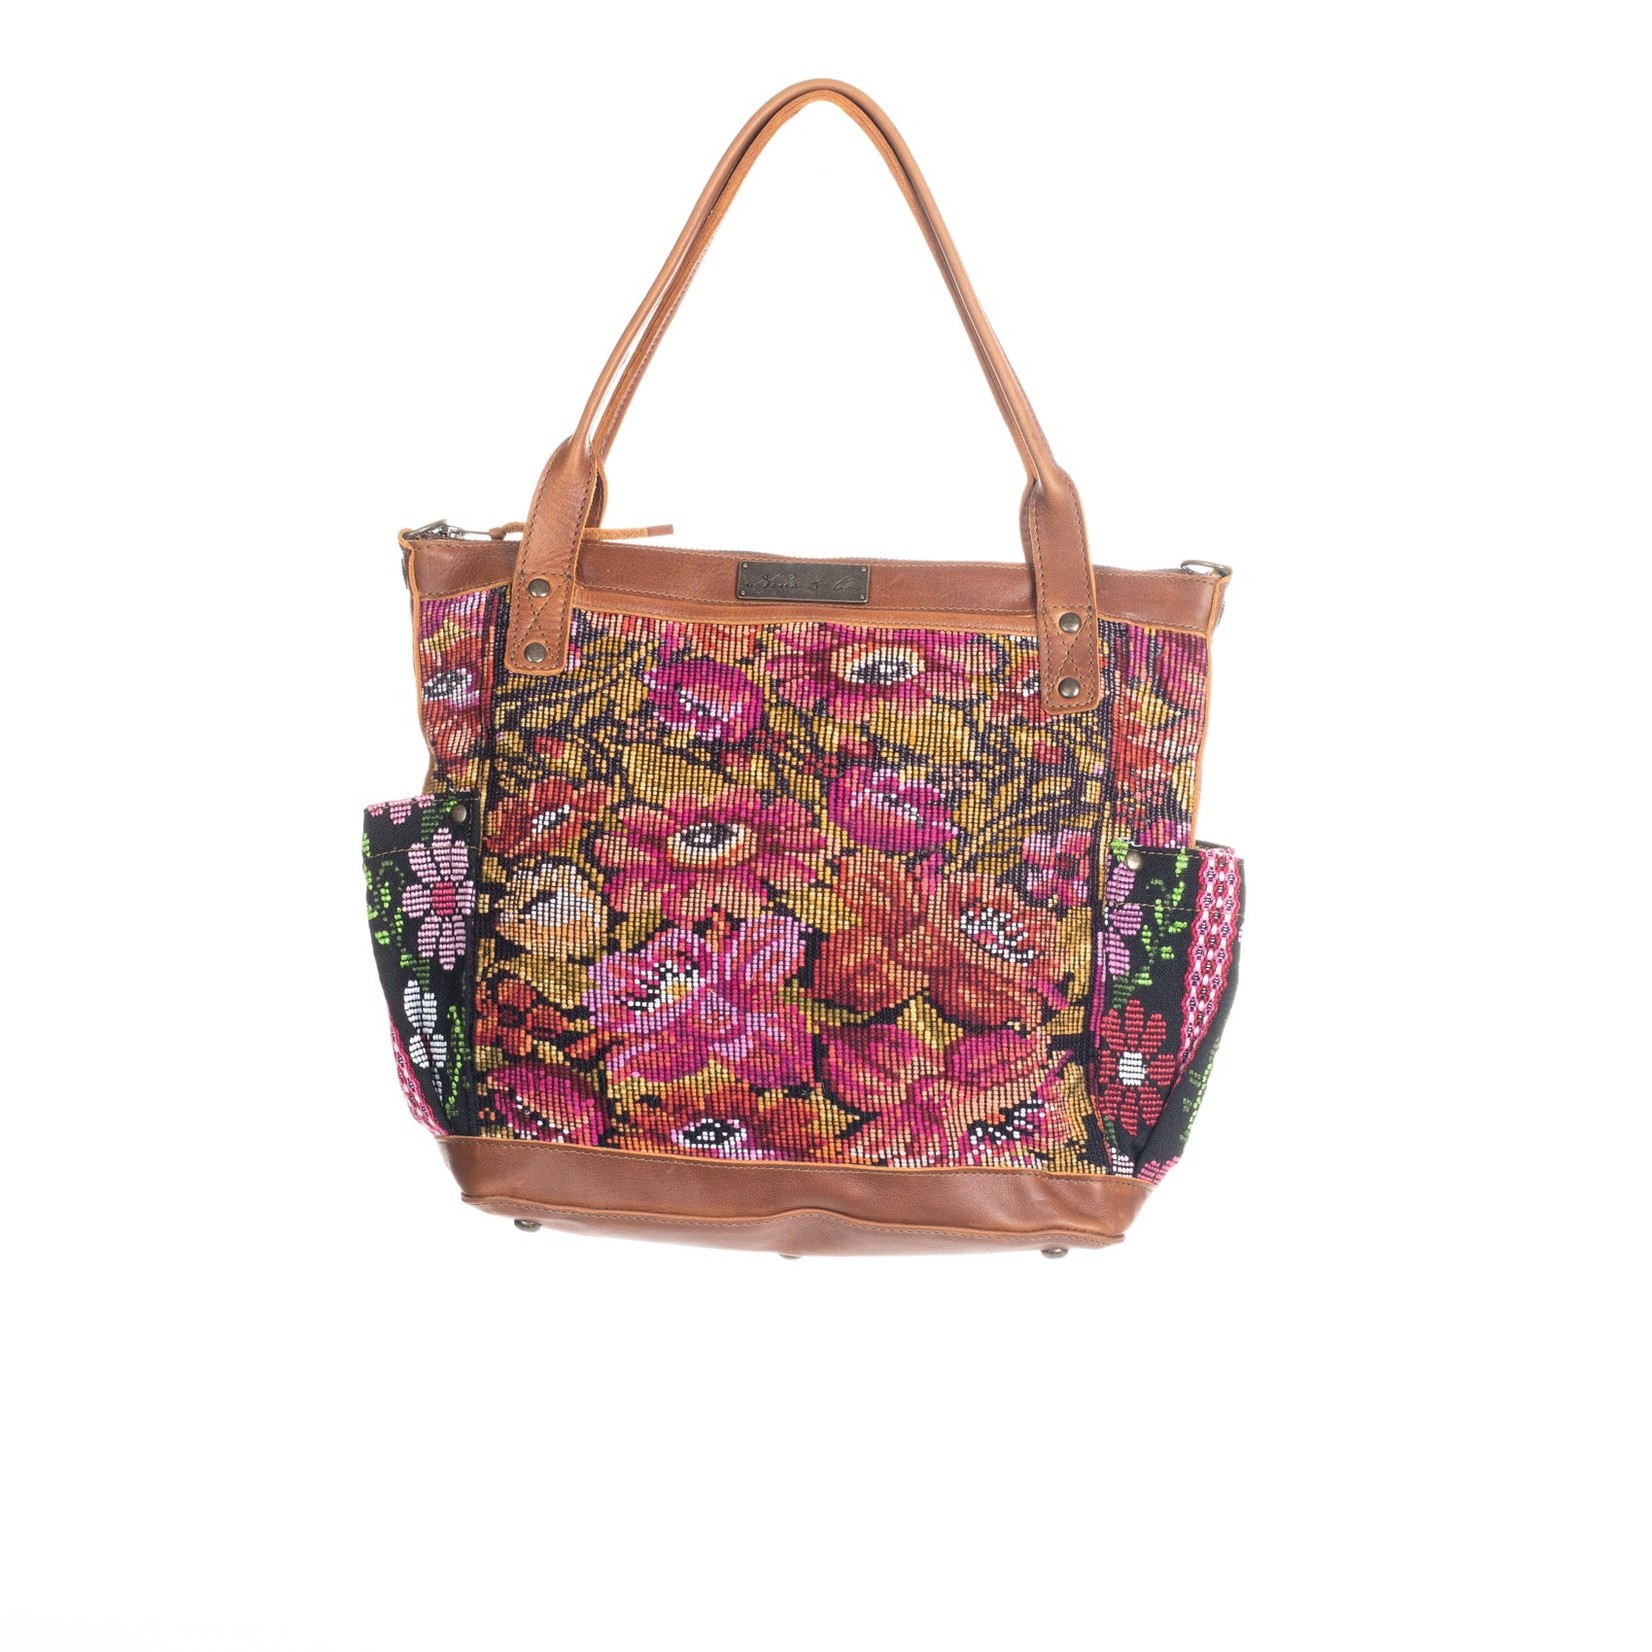 NENA THE PERFECT BAG - ONE OF A KIND 84626